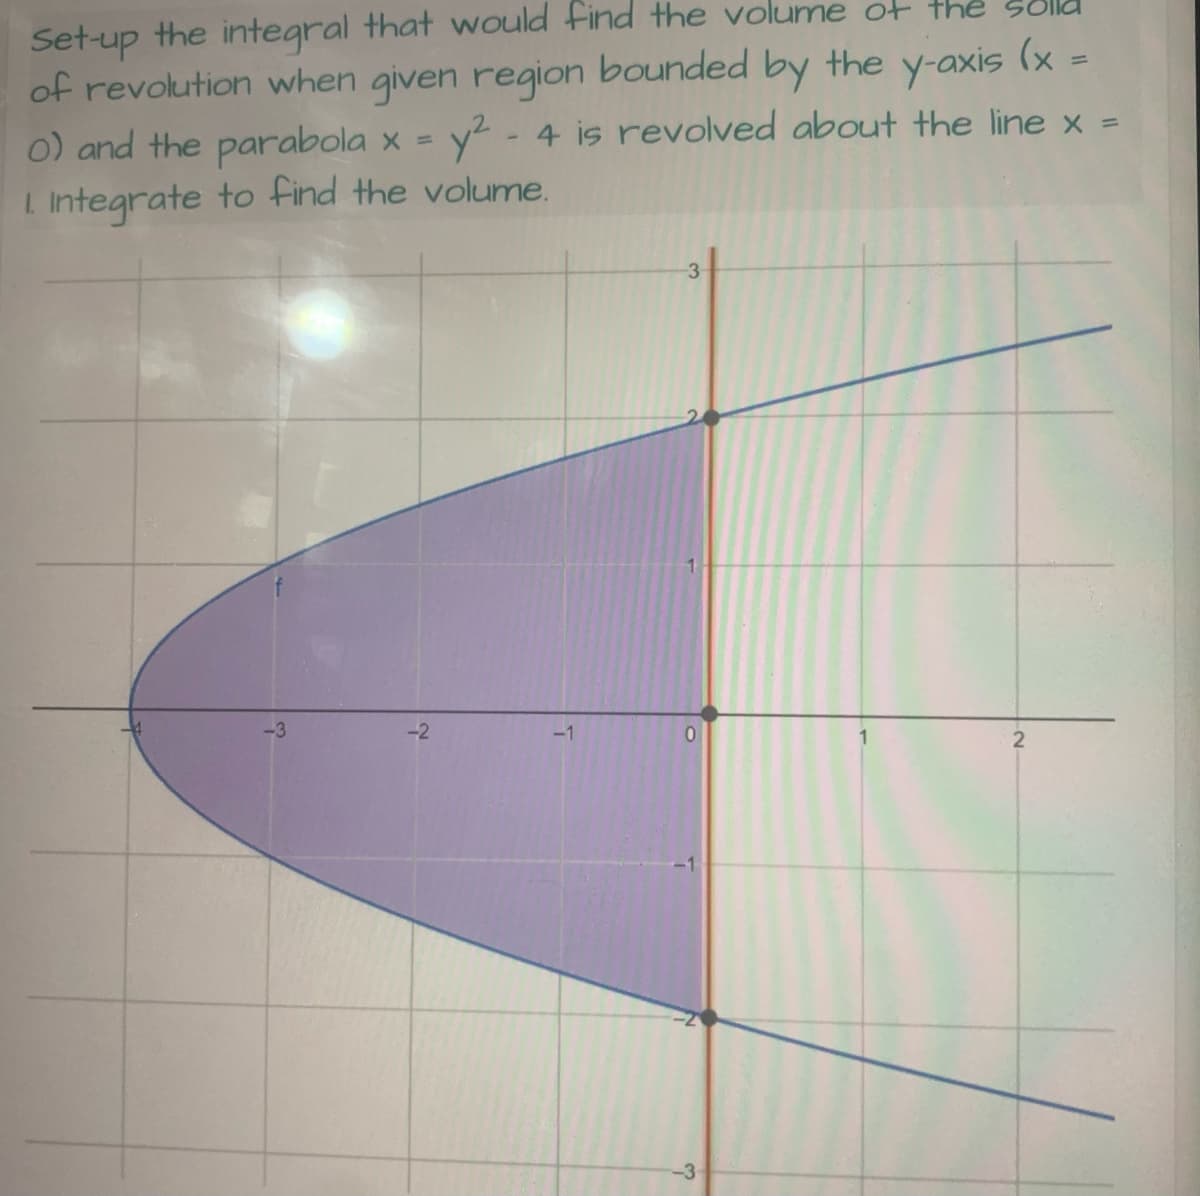 Set-up the integral that would find the volume of the so
of revolution when given region bounded by the y-axis (x =
y²-
o) and the parabola x = 4 is revolved about the line x =
1. Integrate to find the volume.
-3
-2
3
-3